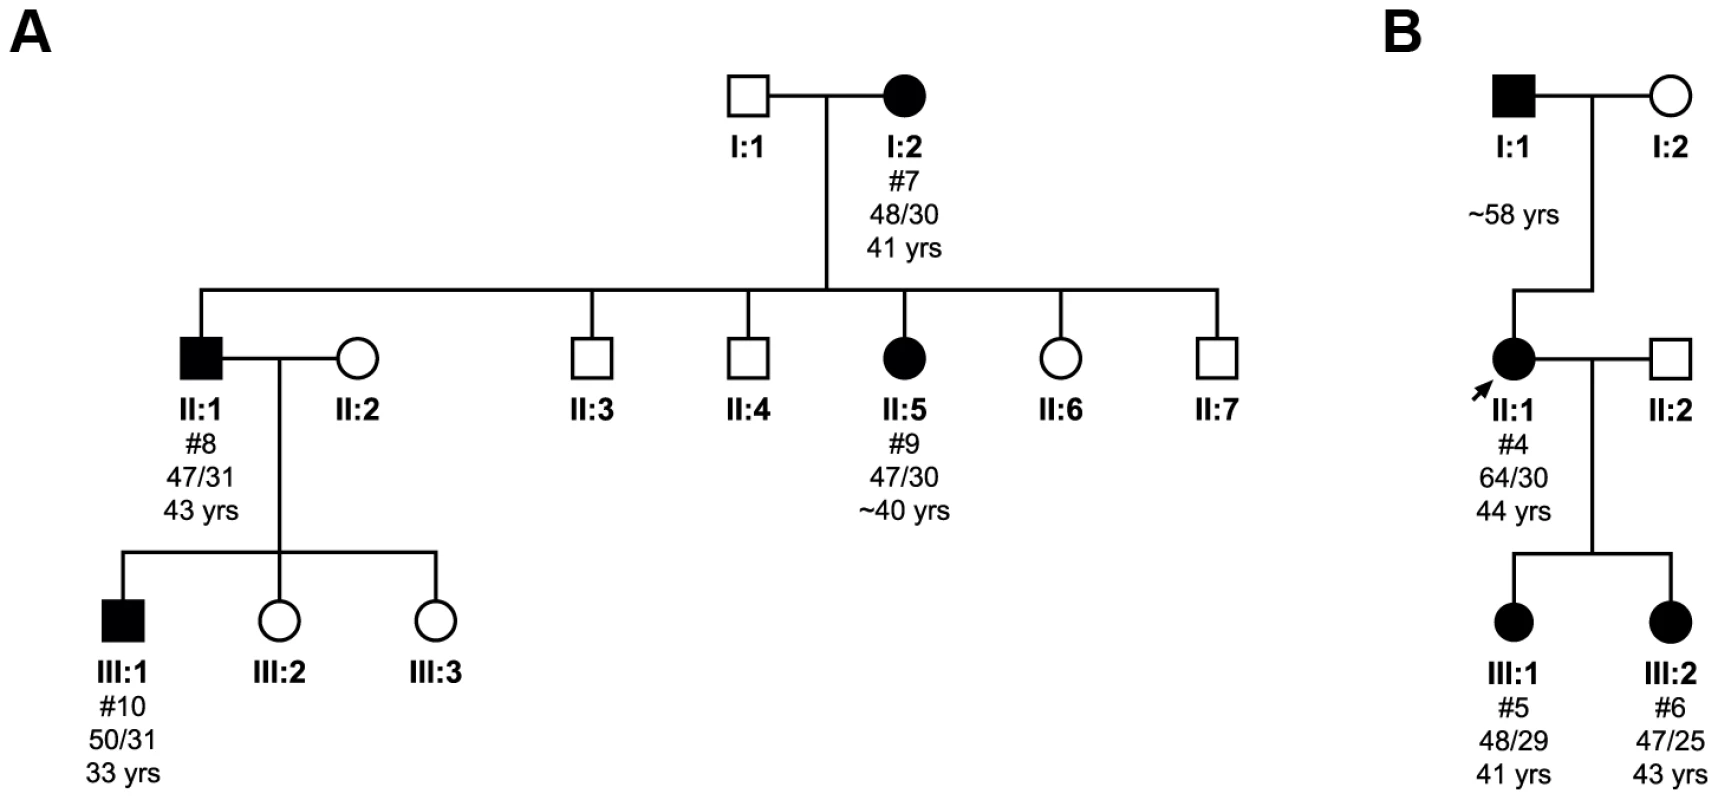 Pedigree analysis and the transmission of the pathogenic expanded allele in two families.